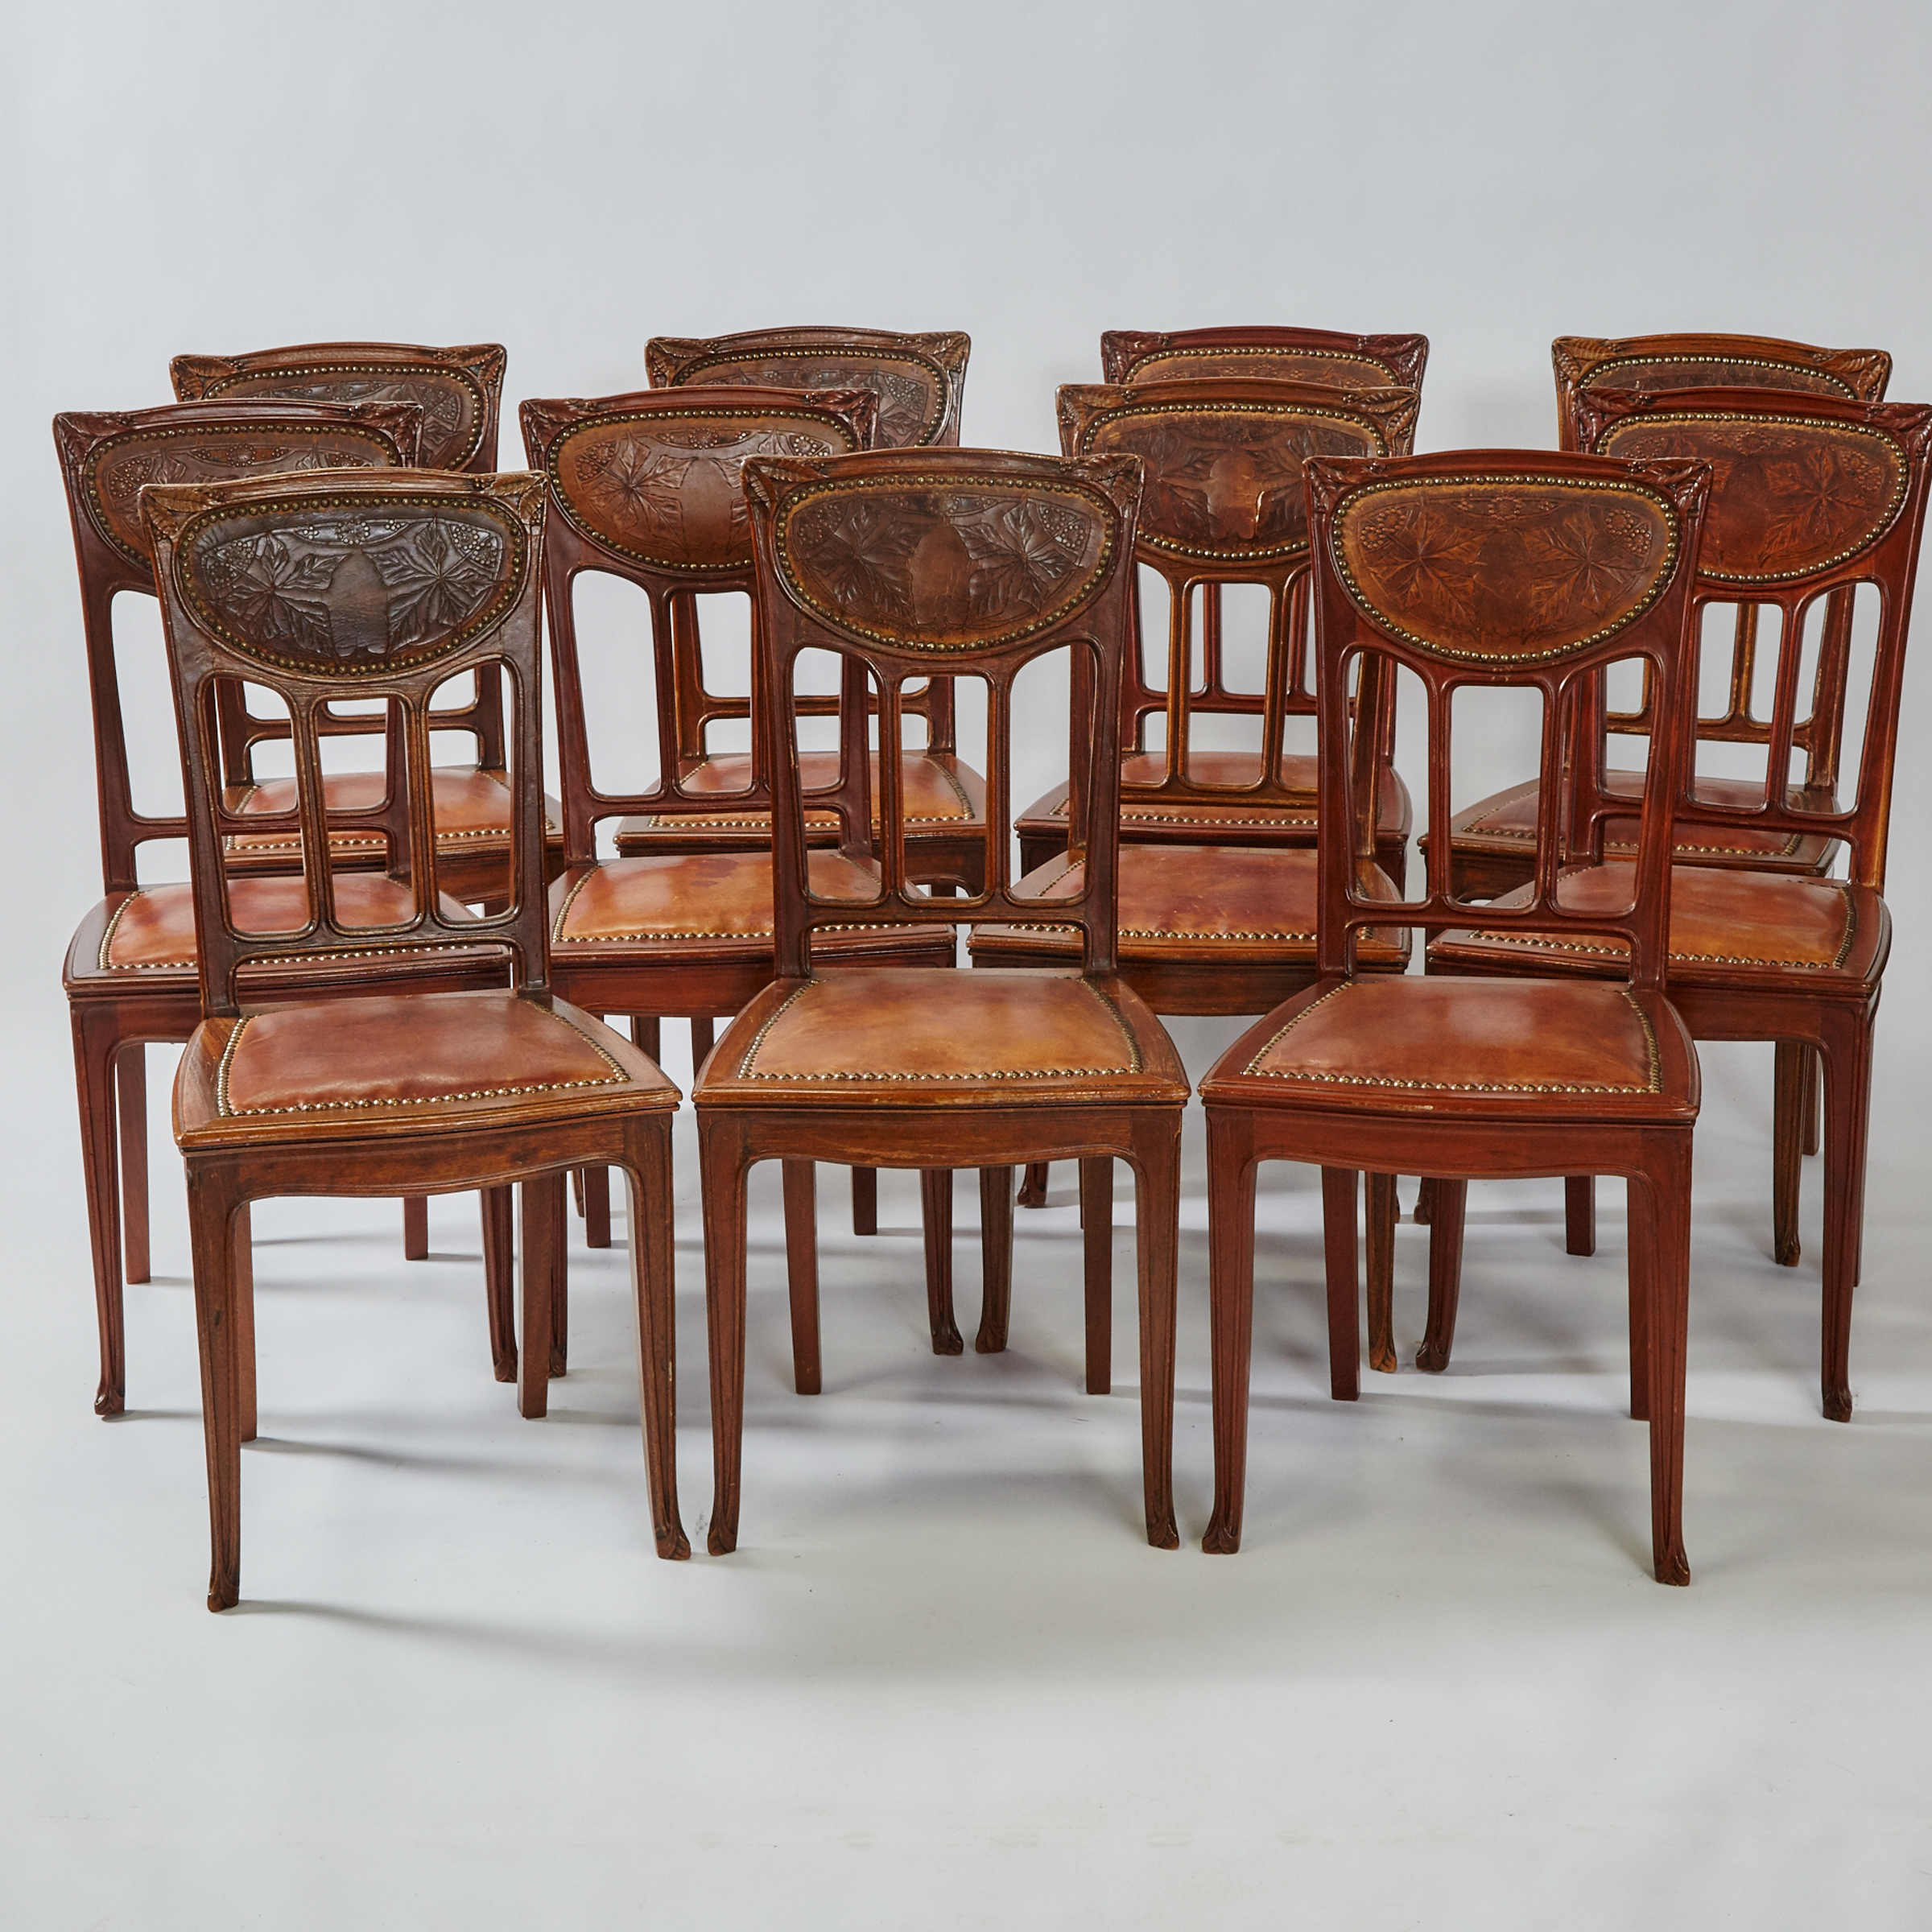 Set of Eleven French Art Nouveau Carved Mahogany Dining Chairs, 19th/early 20th century